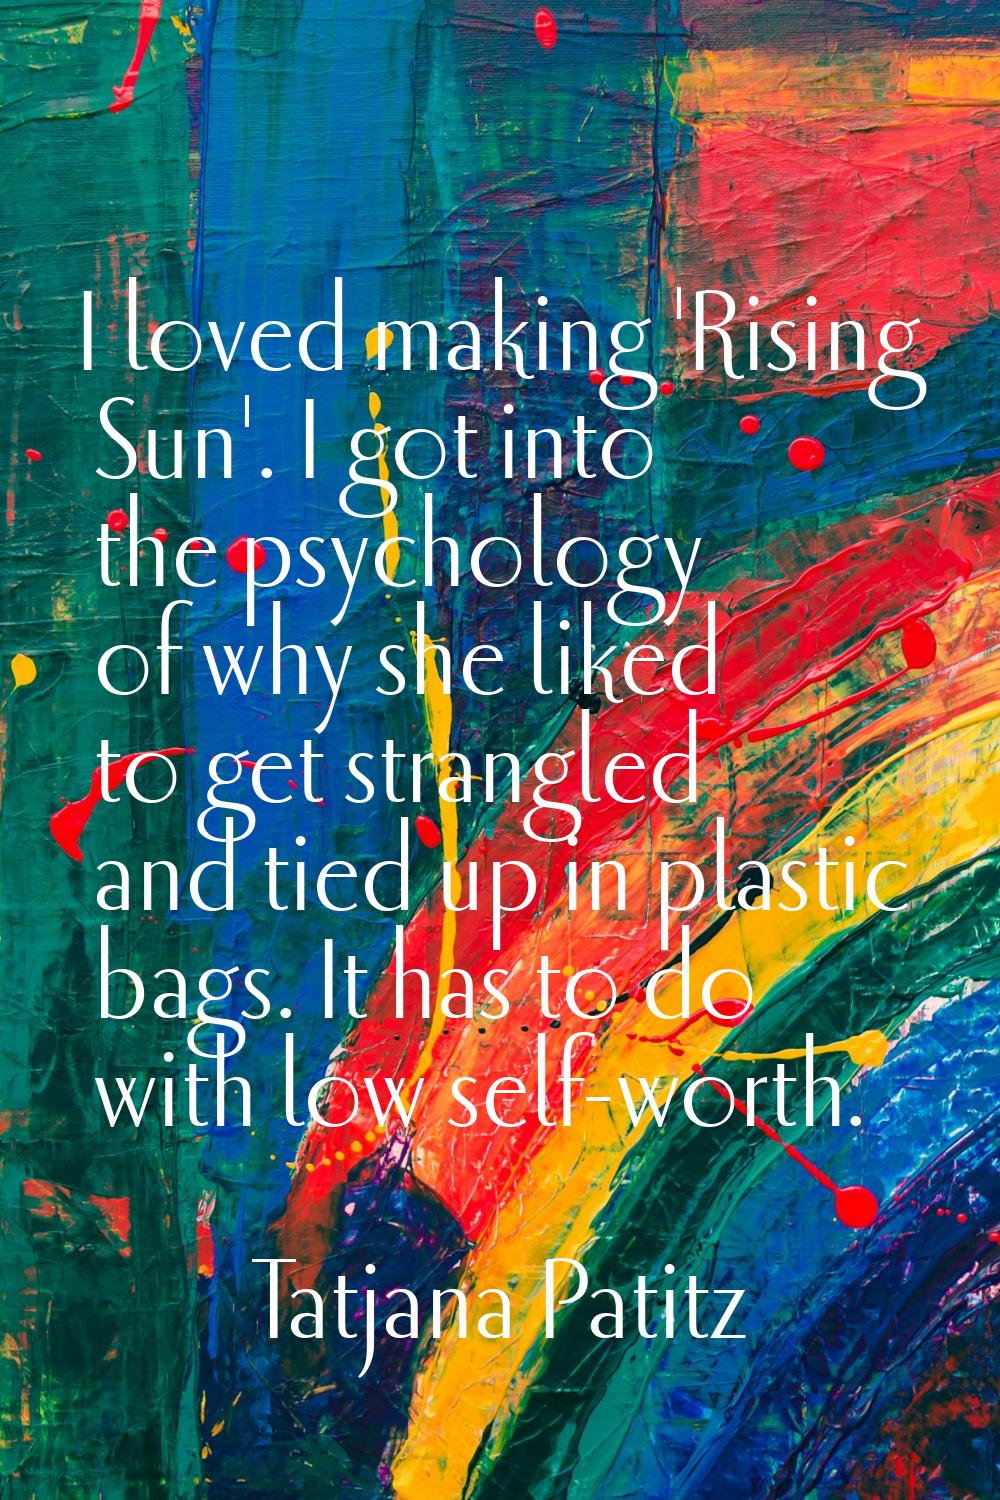 I loved making 'Rising Sun'. I got into the psychology of why she liked to get strangled and tied u